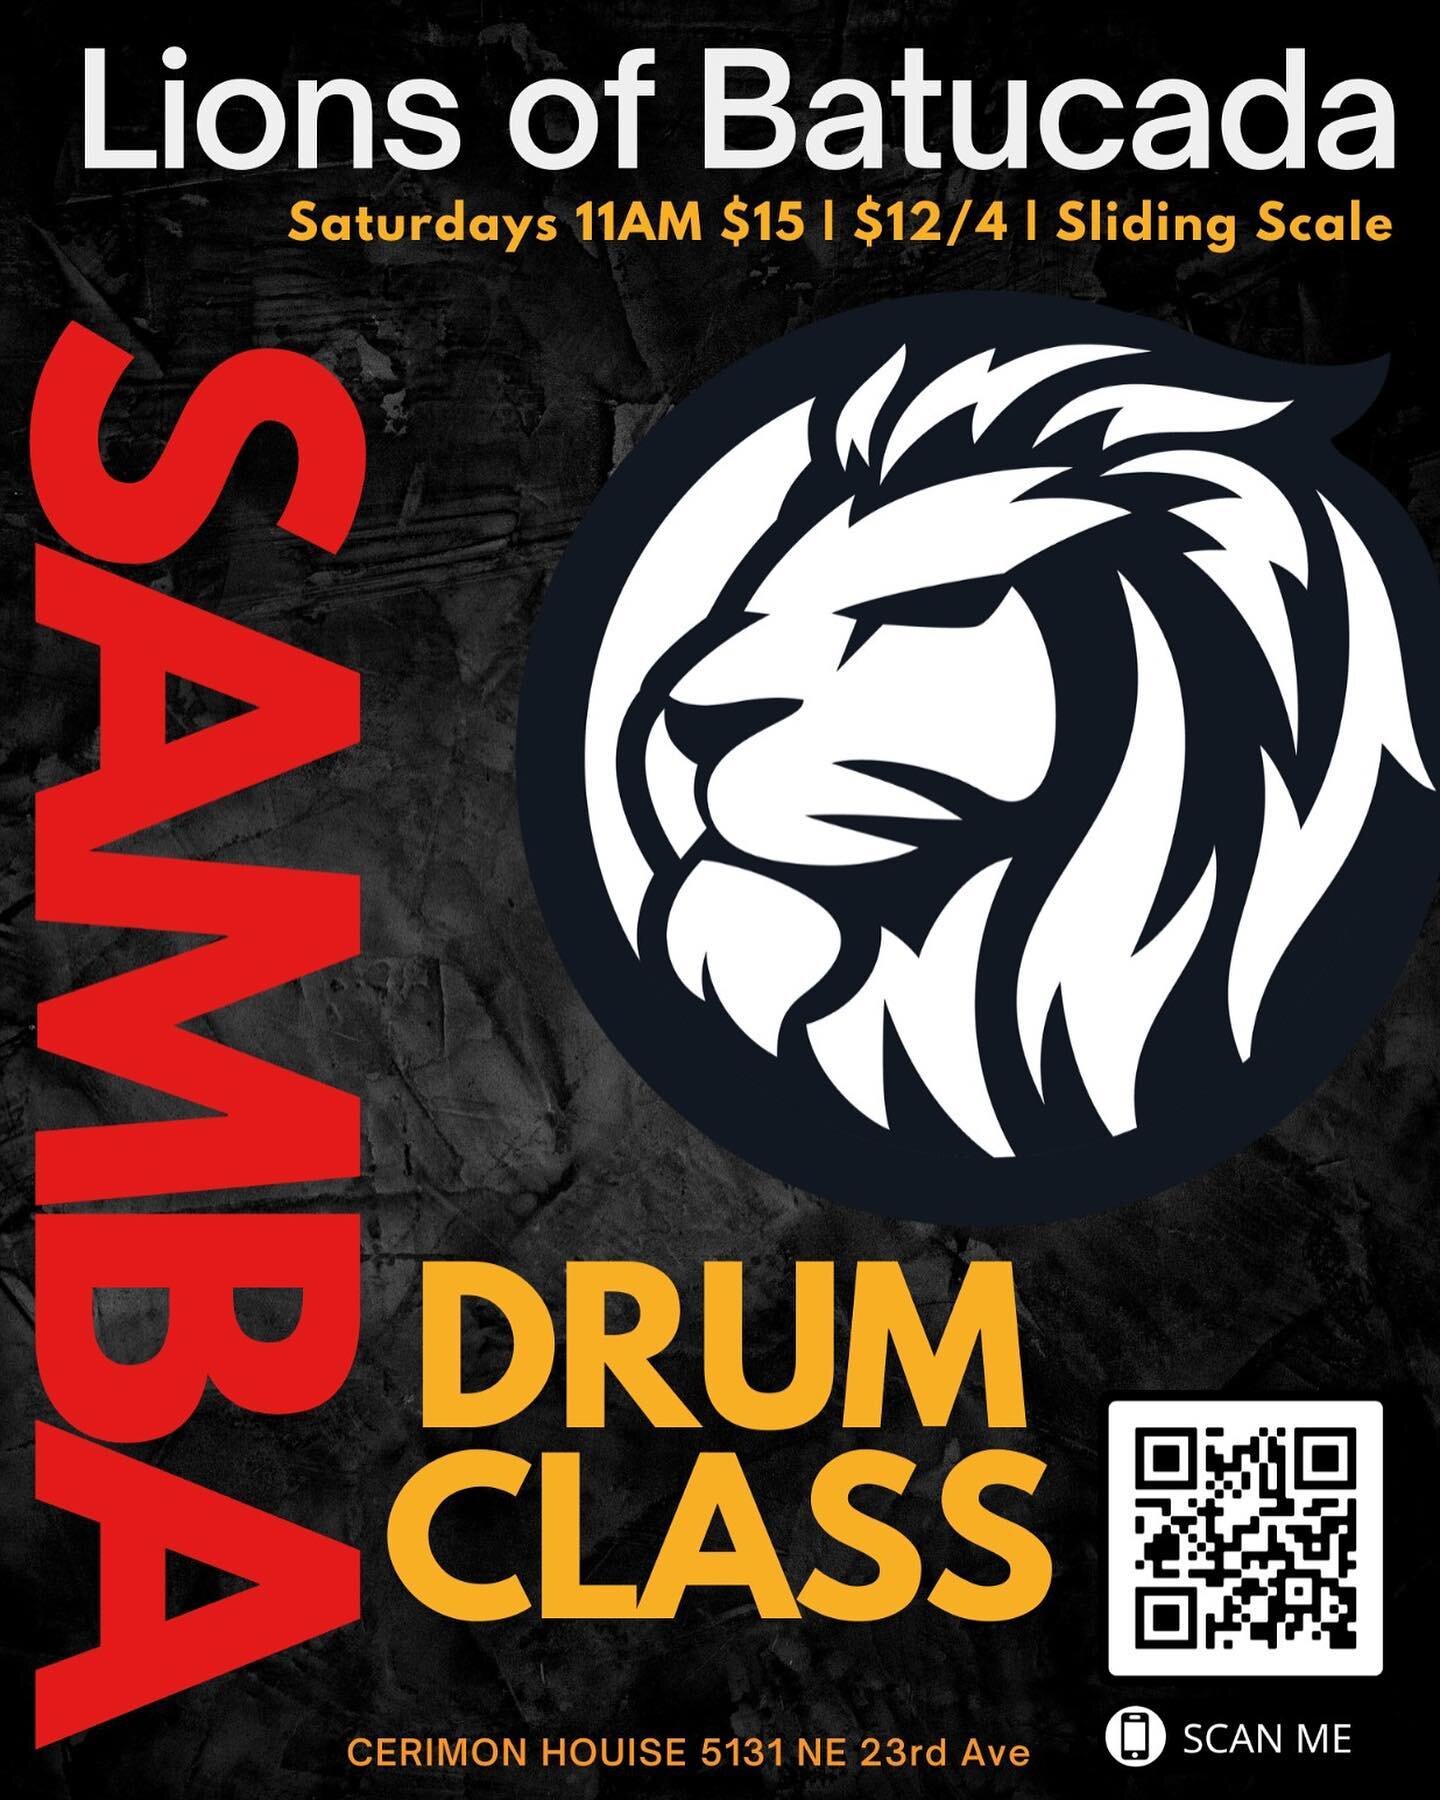 The Lions of Batucada&rsquo;s seasonal pause ends with our Saturday Samba class resuming 11 AM, January 8, 2022. We are full with holiday cheer, and ready to play some music. You as well? Come join us! We even have instruments for you. Samba!